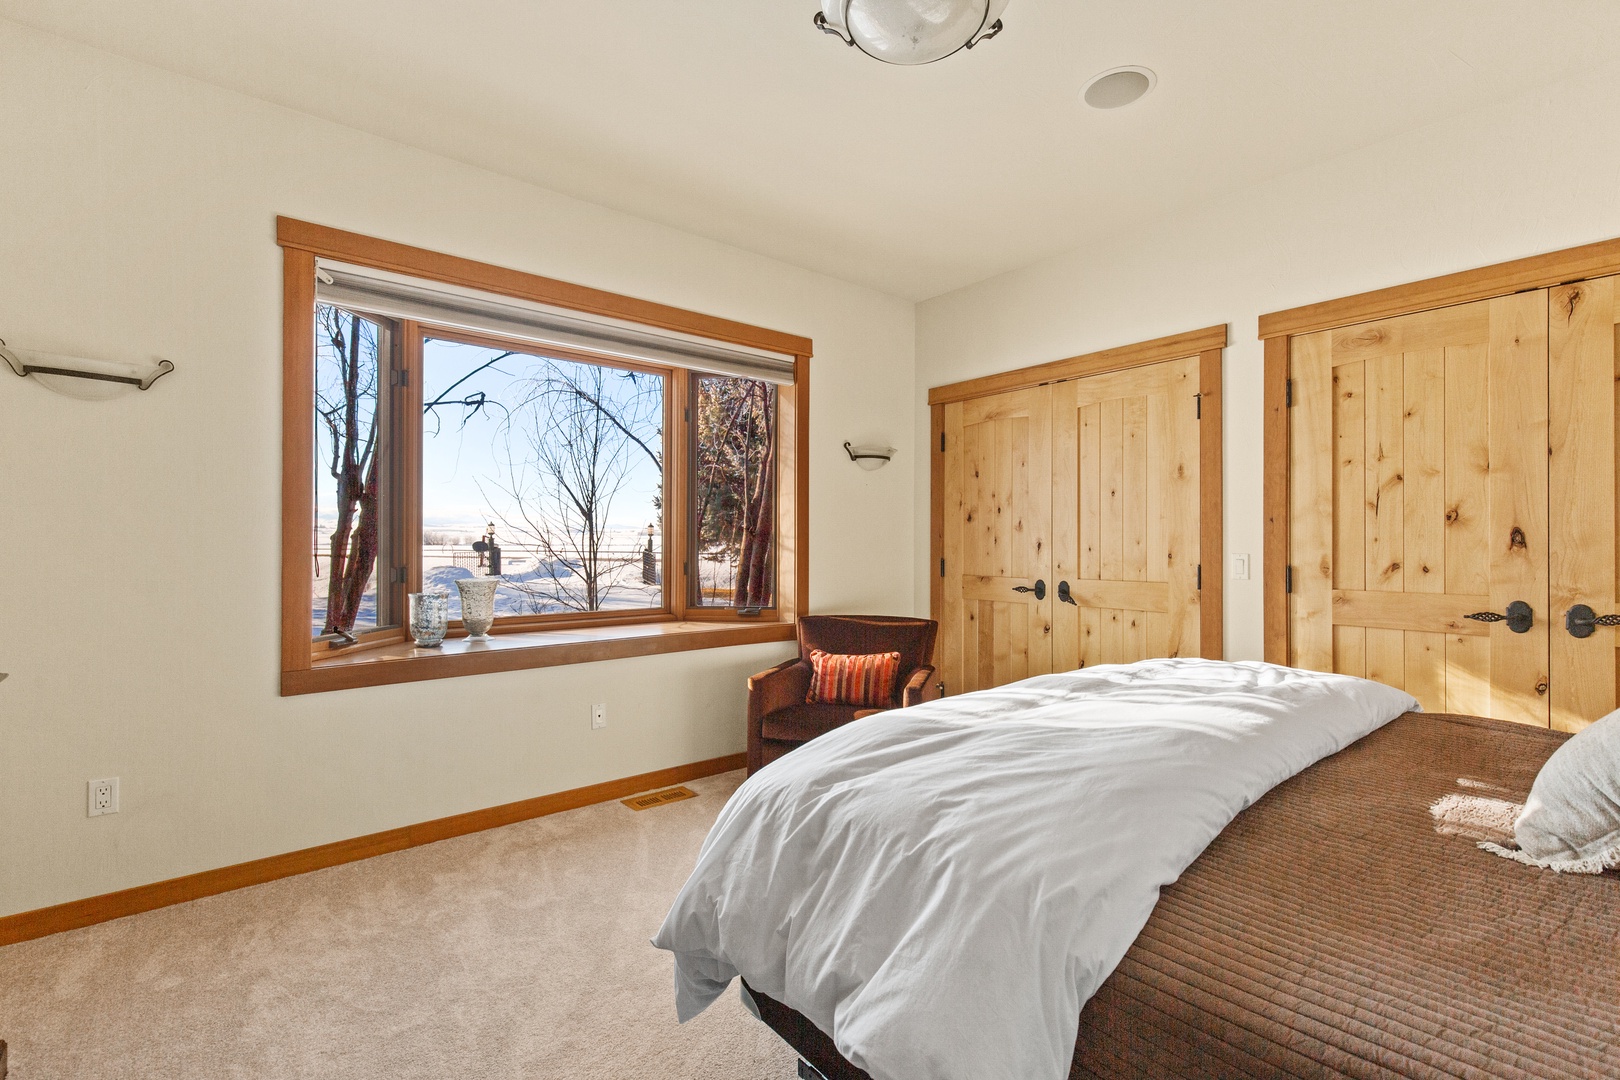 Bozeman Vacation Rentals, The Woodland Oasis - Second bedroom with king bed and amazing views